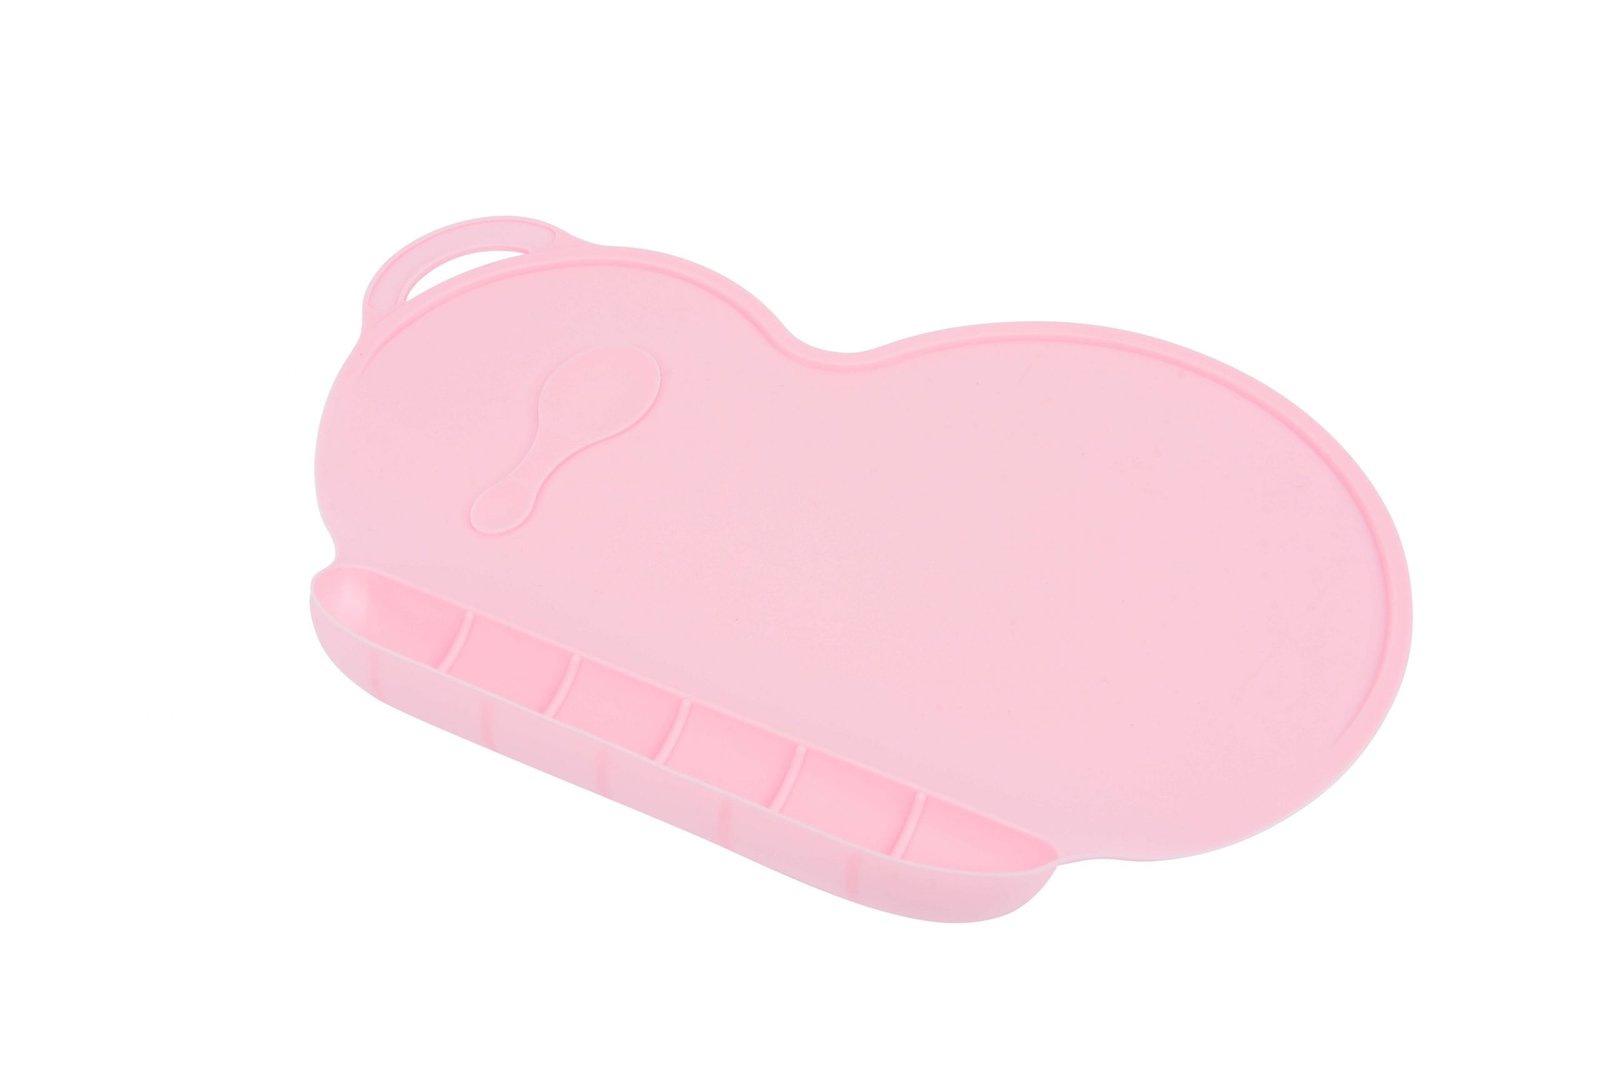 https://www.wetopsilicone.com/wp-content/uploads/2020/12/Silicone-Baby-Feeding-Mat-scaled.jpg